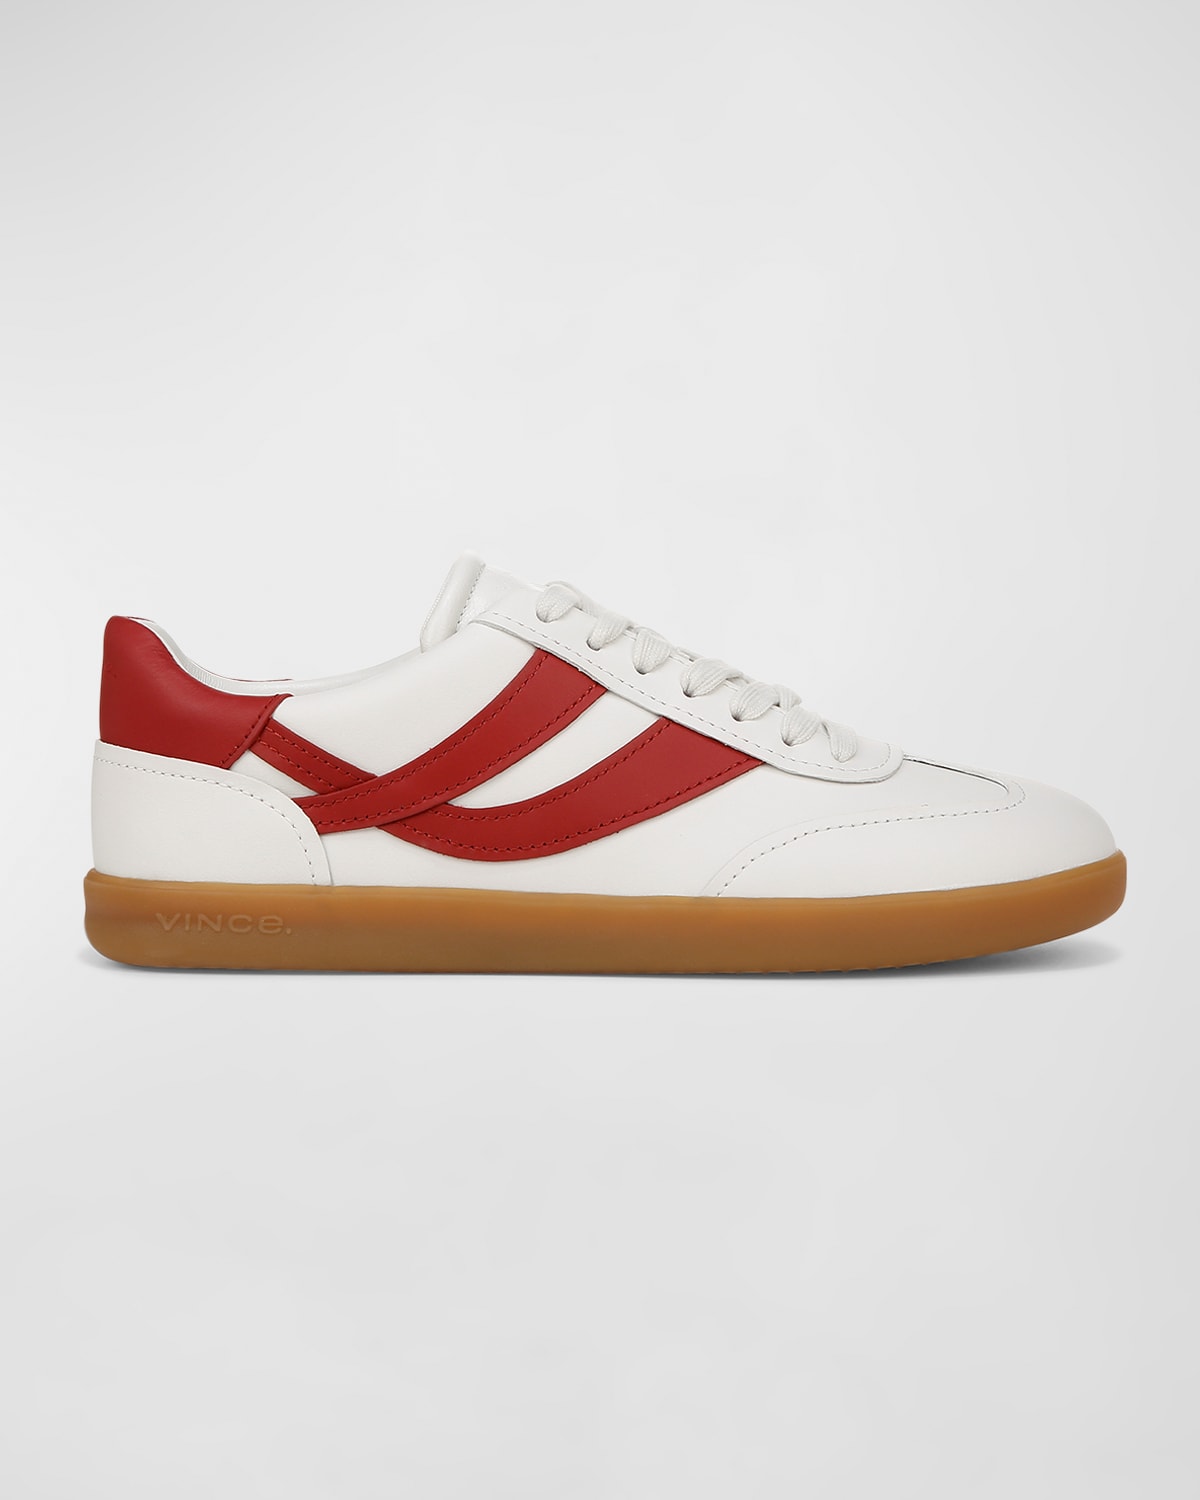 VINCE OASIS BICOLOR LEATHER RETRO SNEAKERS